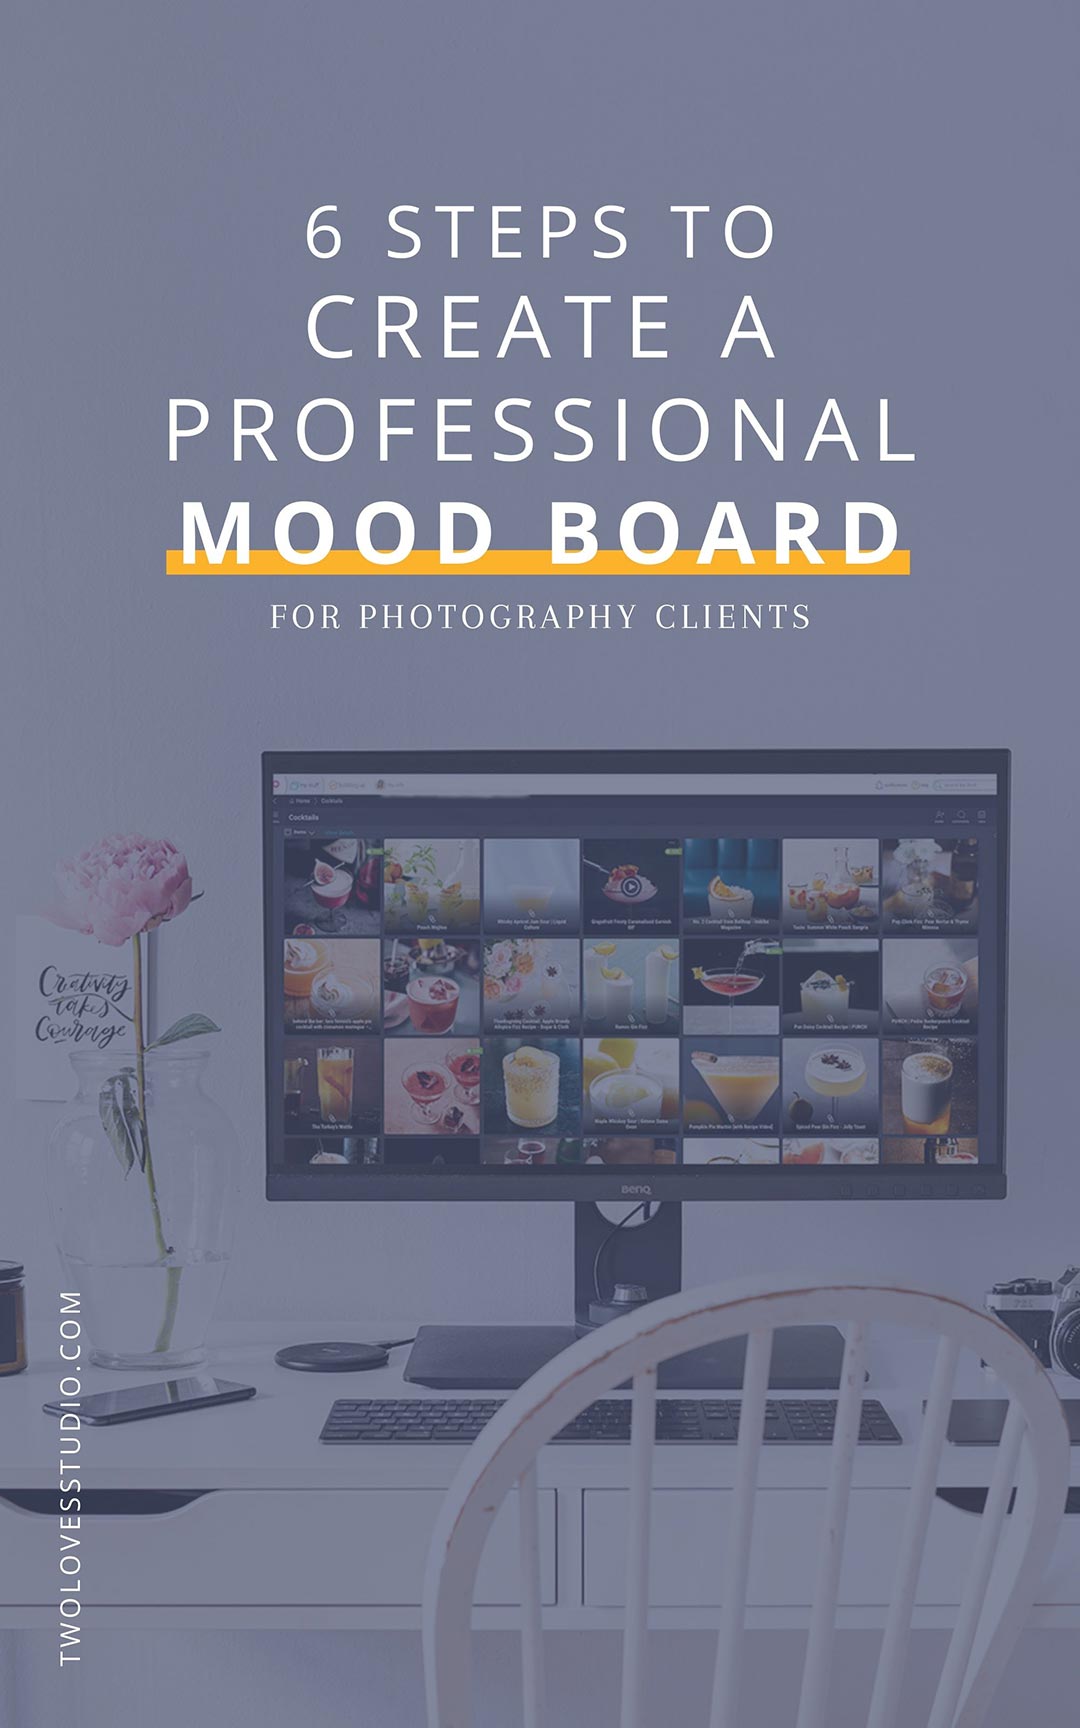 How to Create a Professional Mood Board For Photography Clients